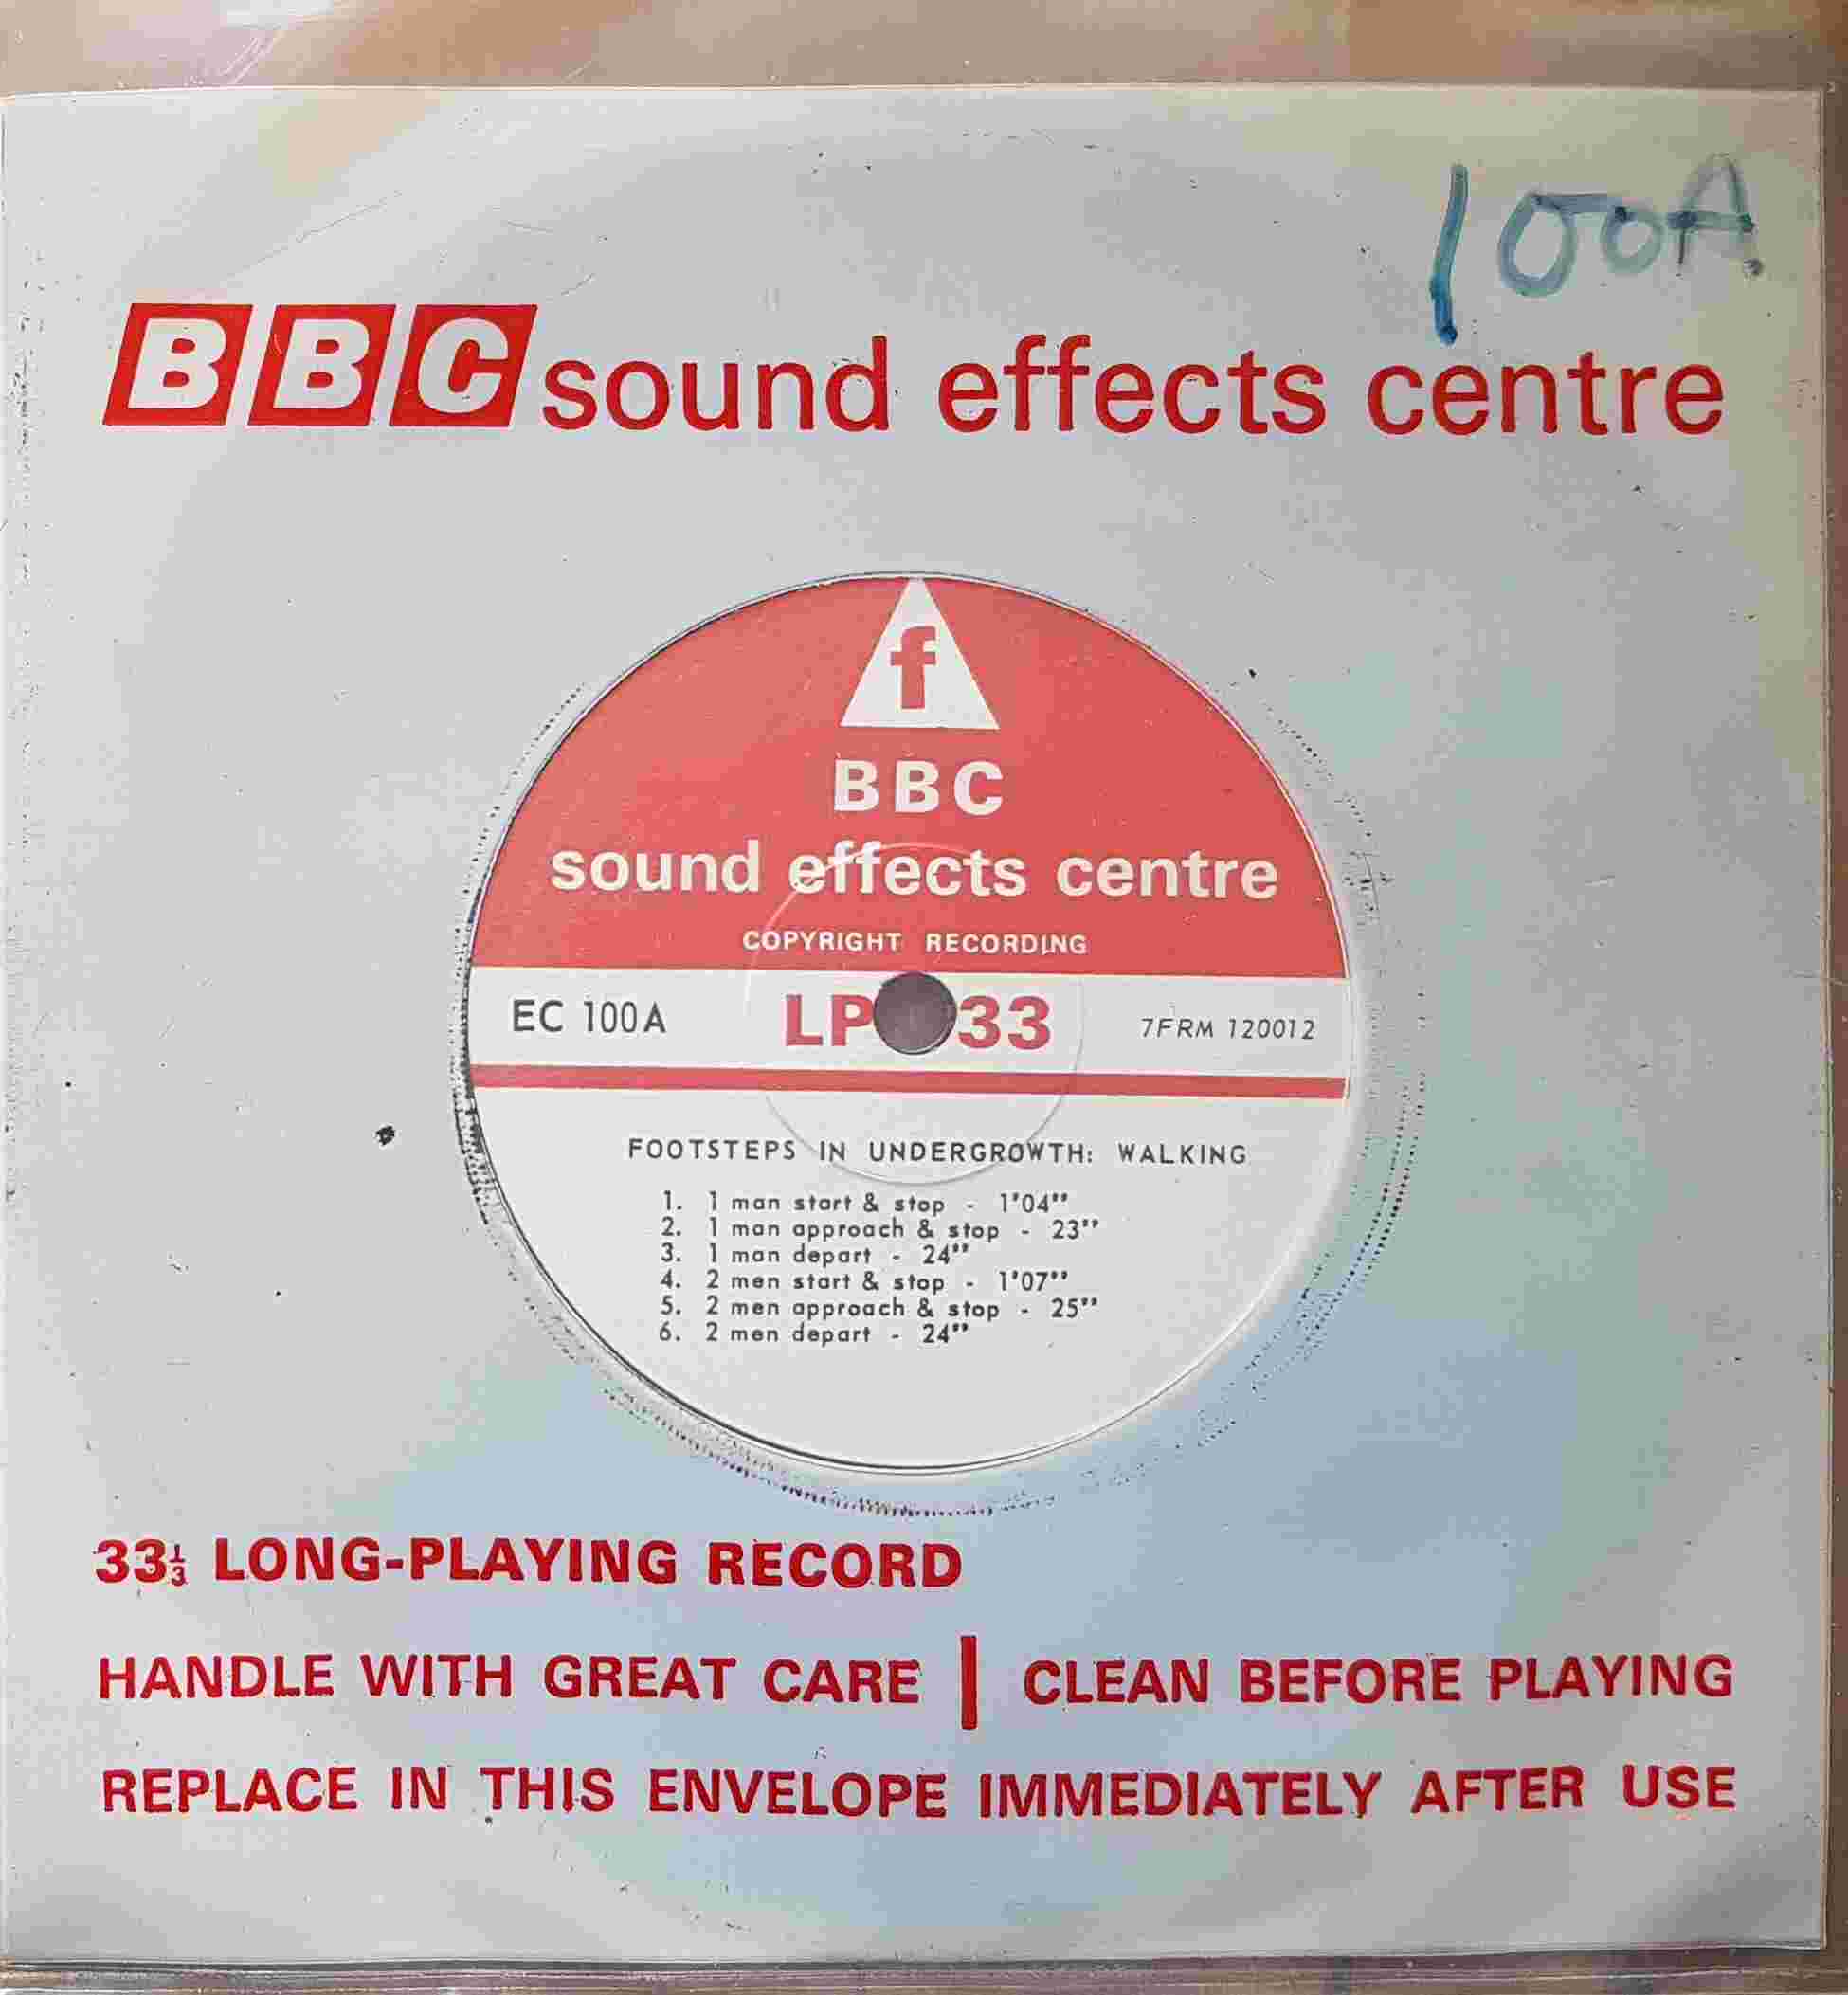 Picture of EC 100A Footsteps in undergrowth by artist Not registered from the BBC records and Tapes library